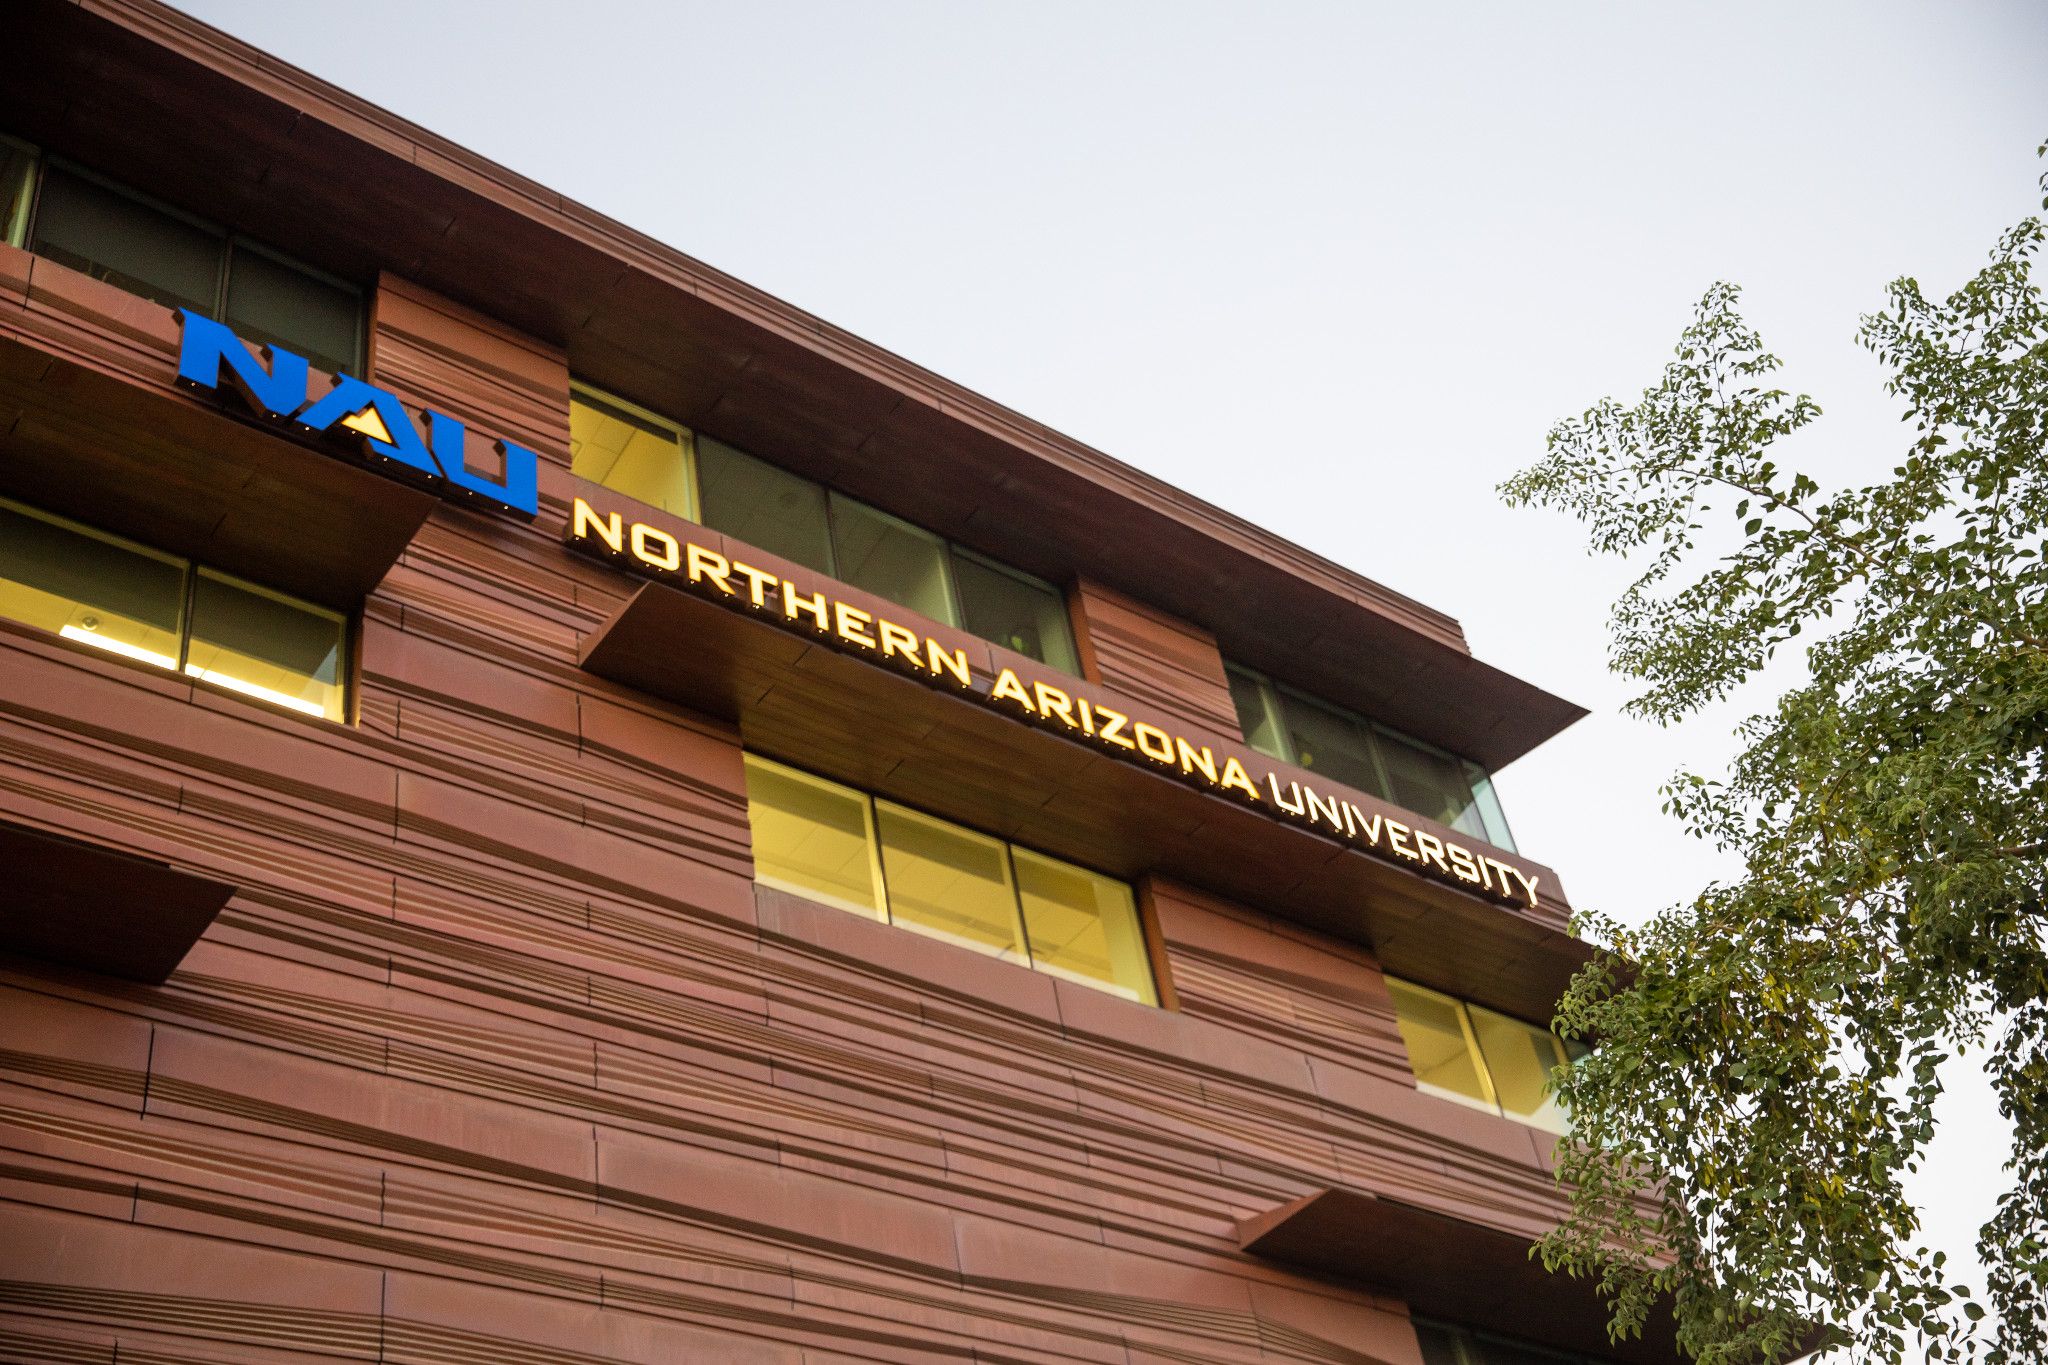 Northern Arizona University announces NAU Health, new college of medicine focused on underserved, rural and Indigenous populations